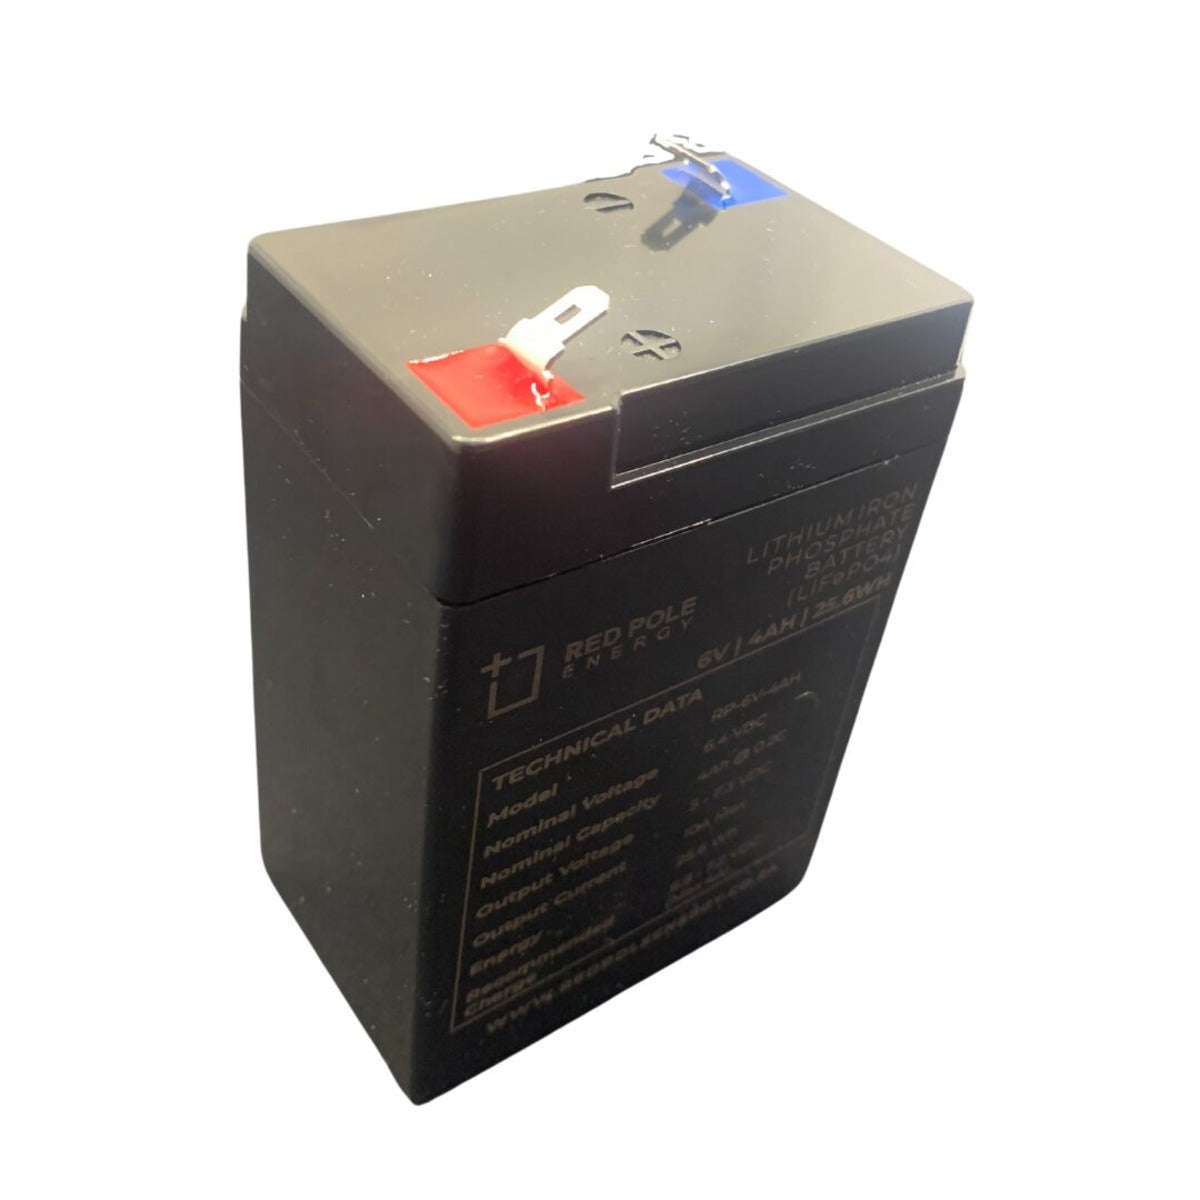 Red Pole Energy 6V 4Ah 26Wh Magneto Replacement LiFeP04 Battery